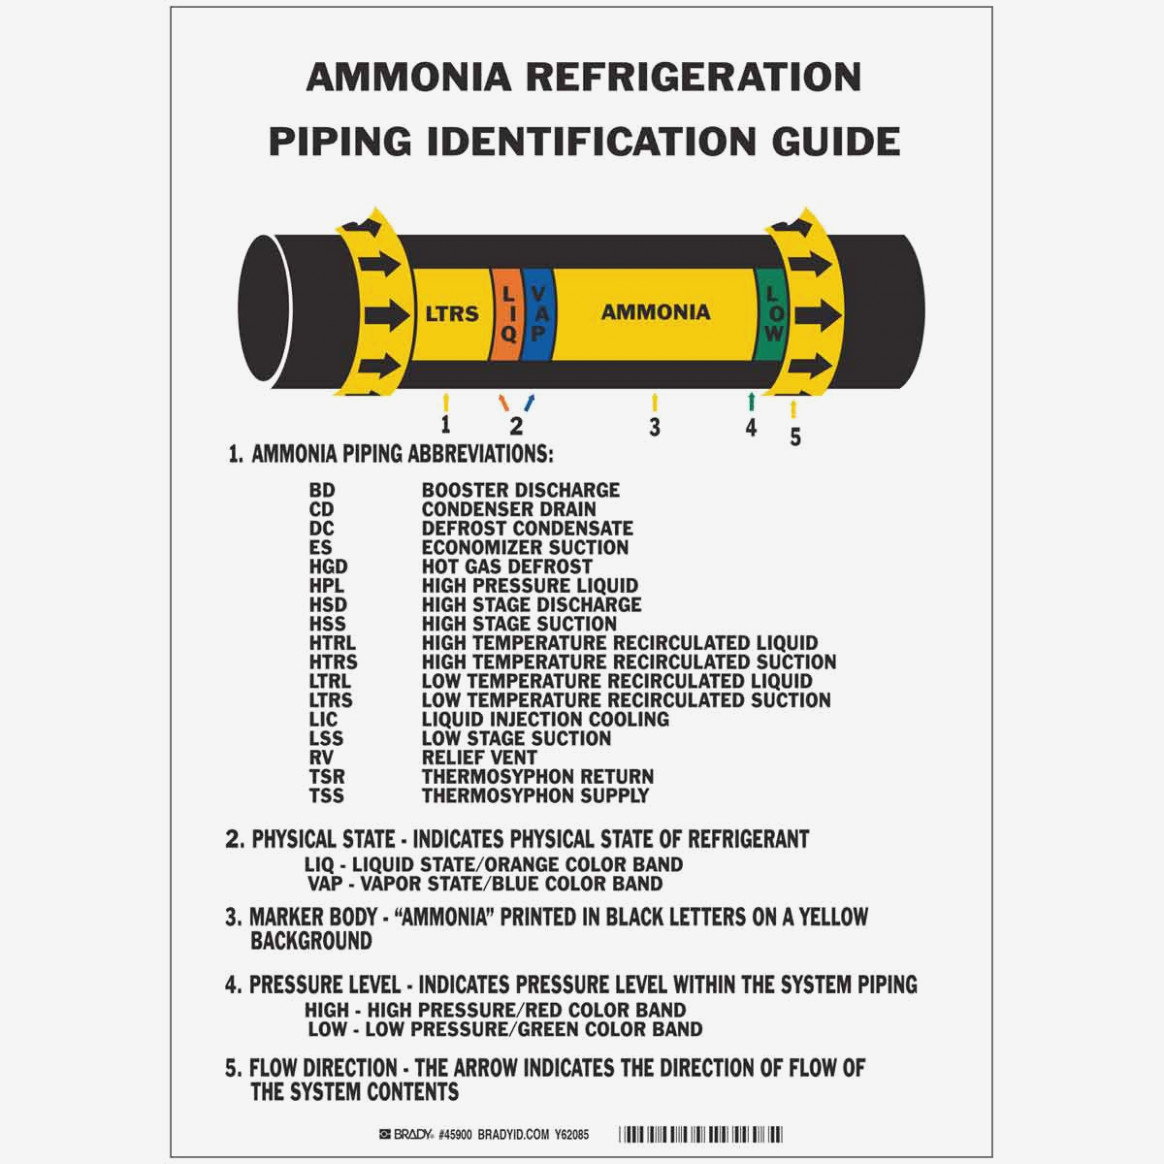 Ammonia piping specifications